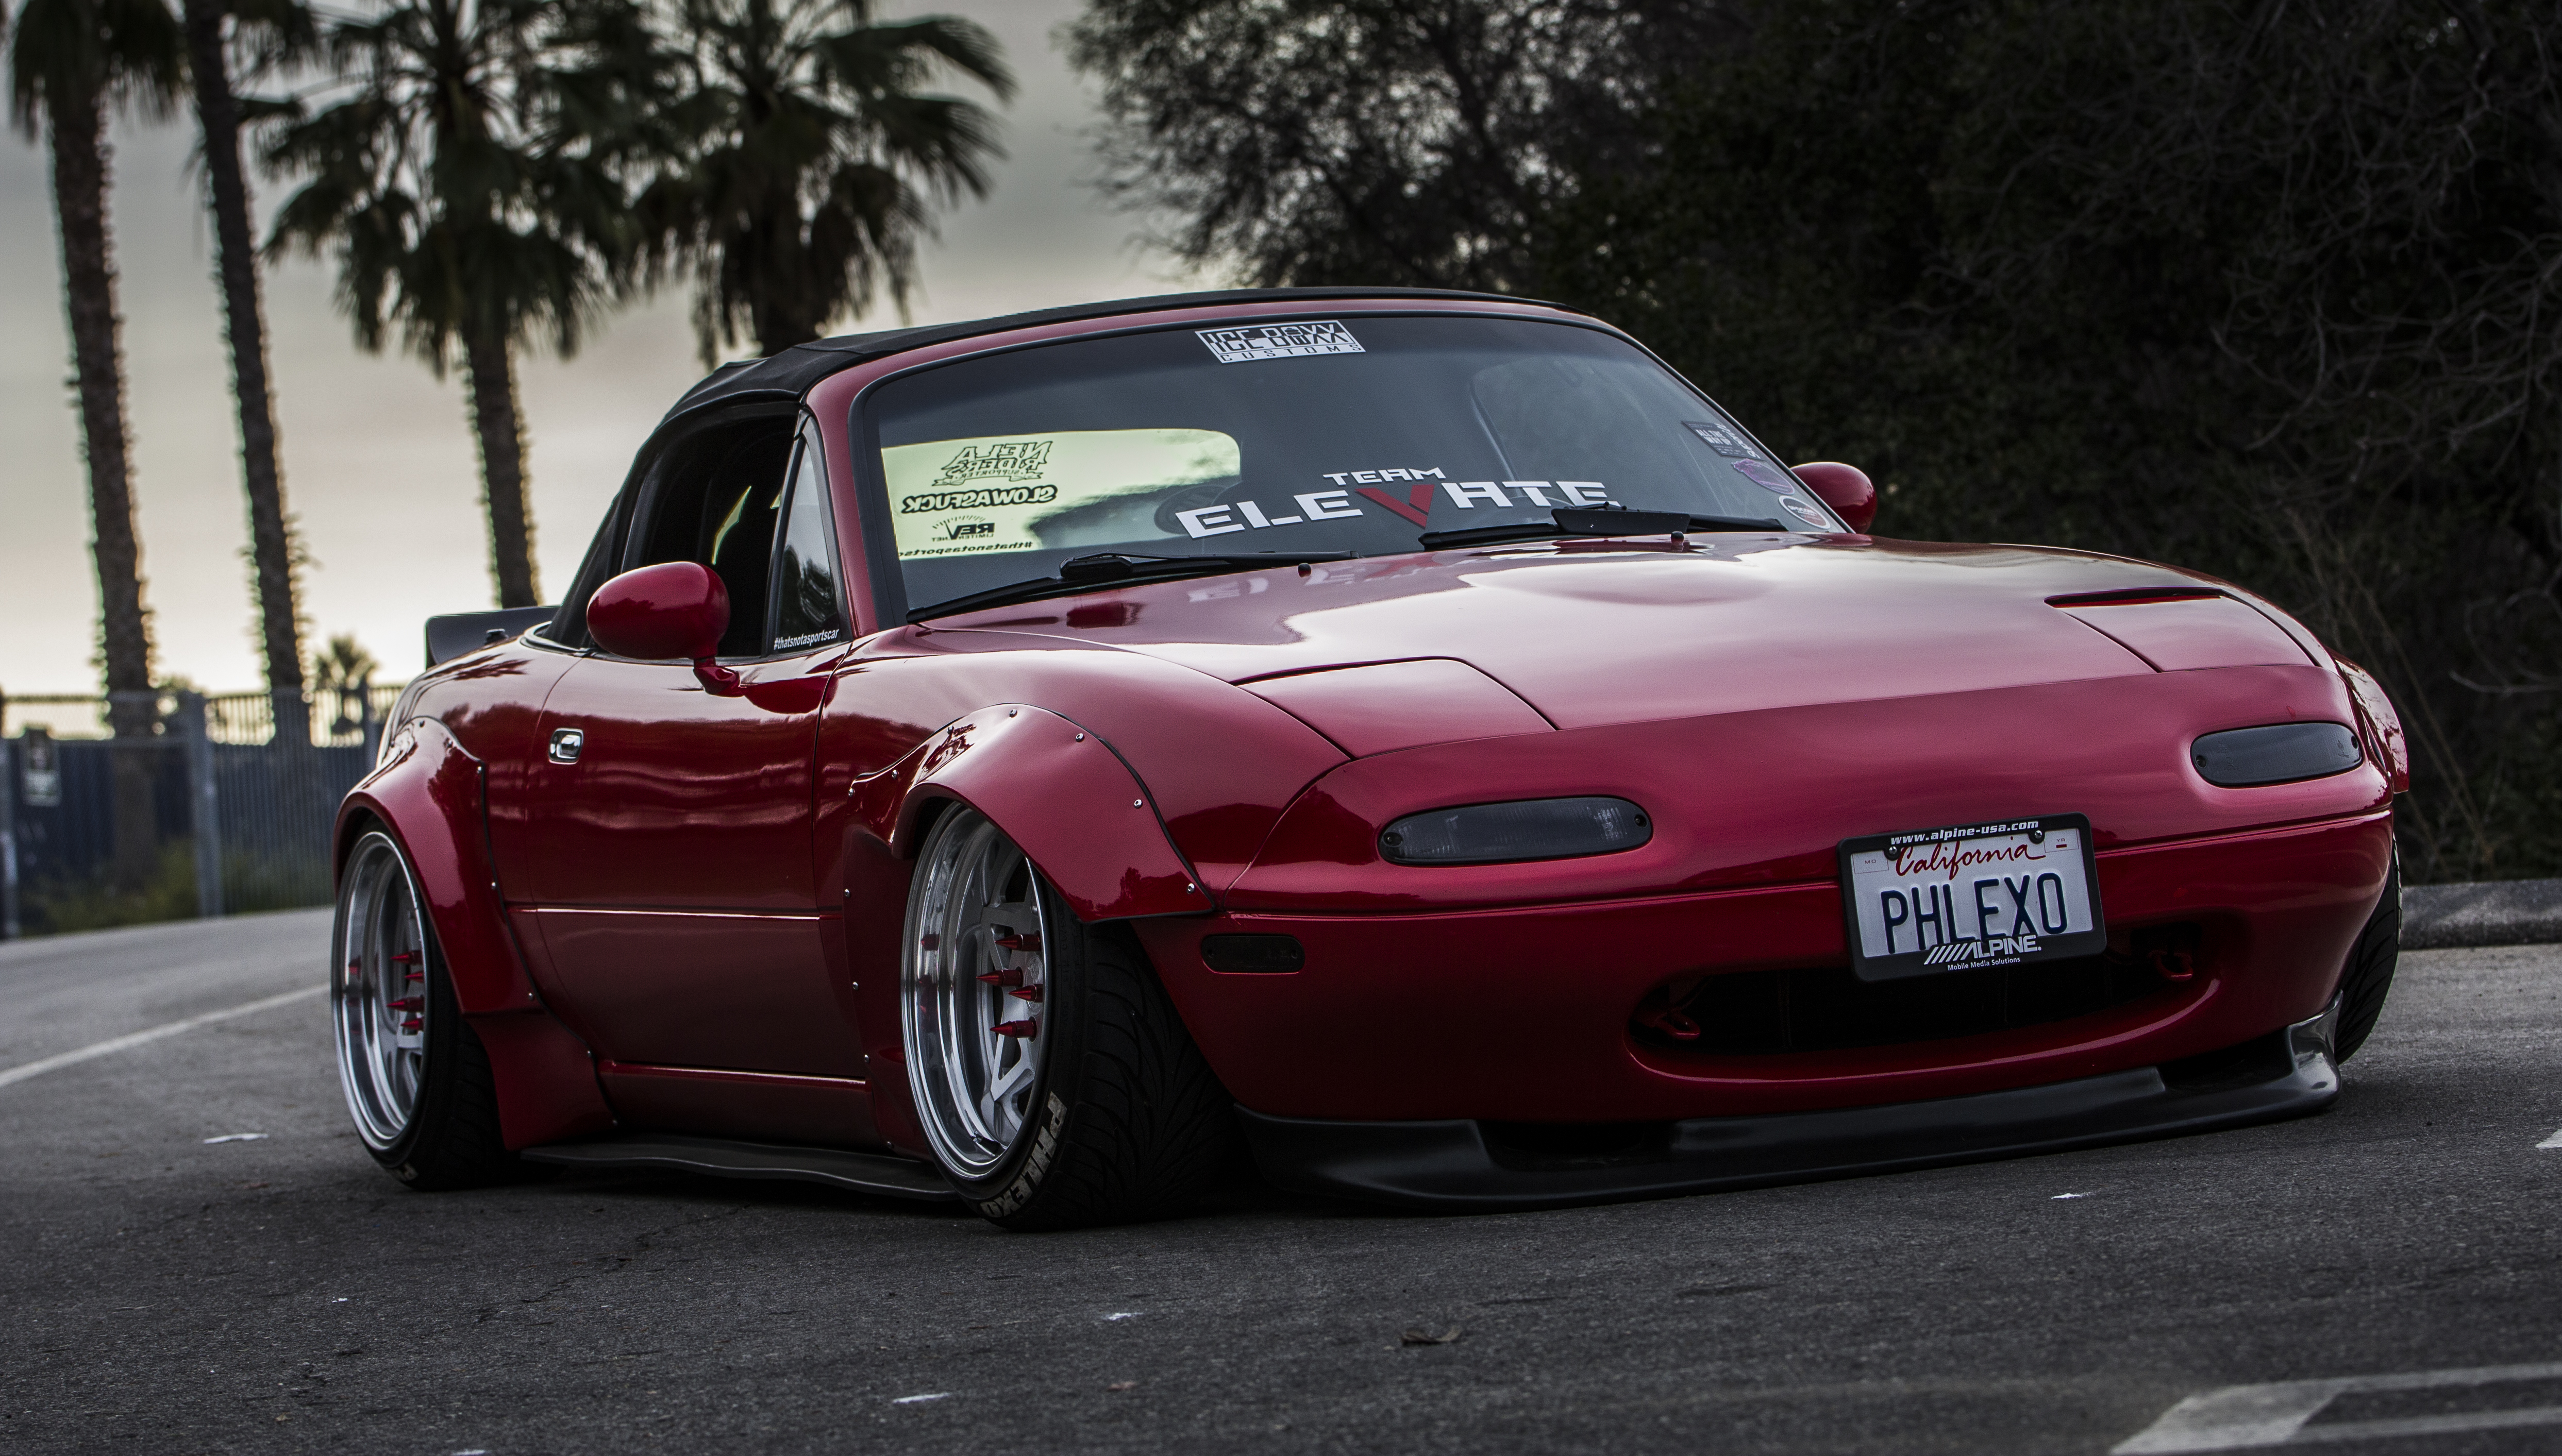 General 4971x2826 Mazda MX-5 widebody Rocket Bunny Mazda sunset Los Angeles car vehicle red cars pop-up headlights bolt-on fender flares Japanese cars bodykit USA North America convertible